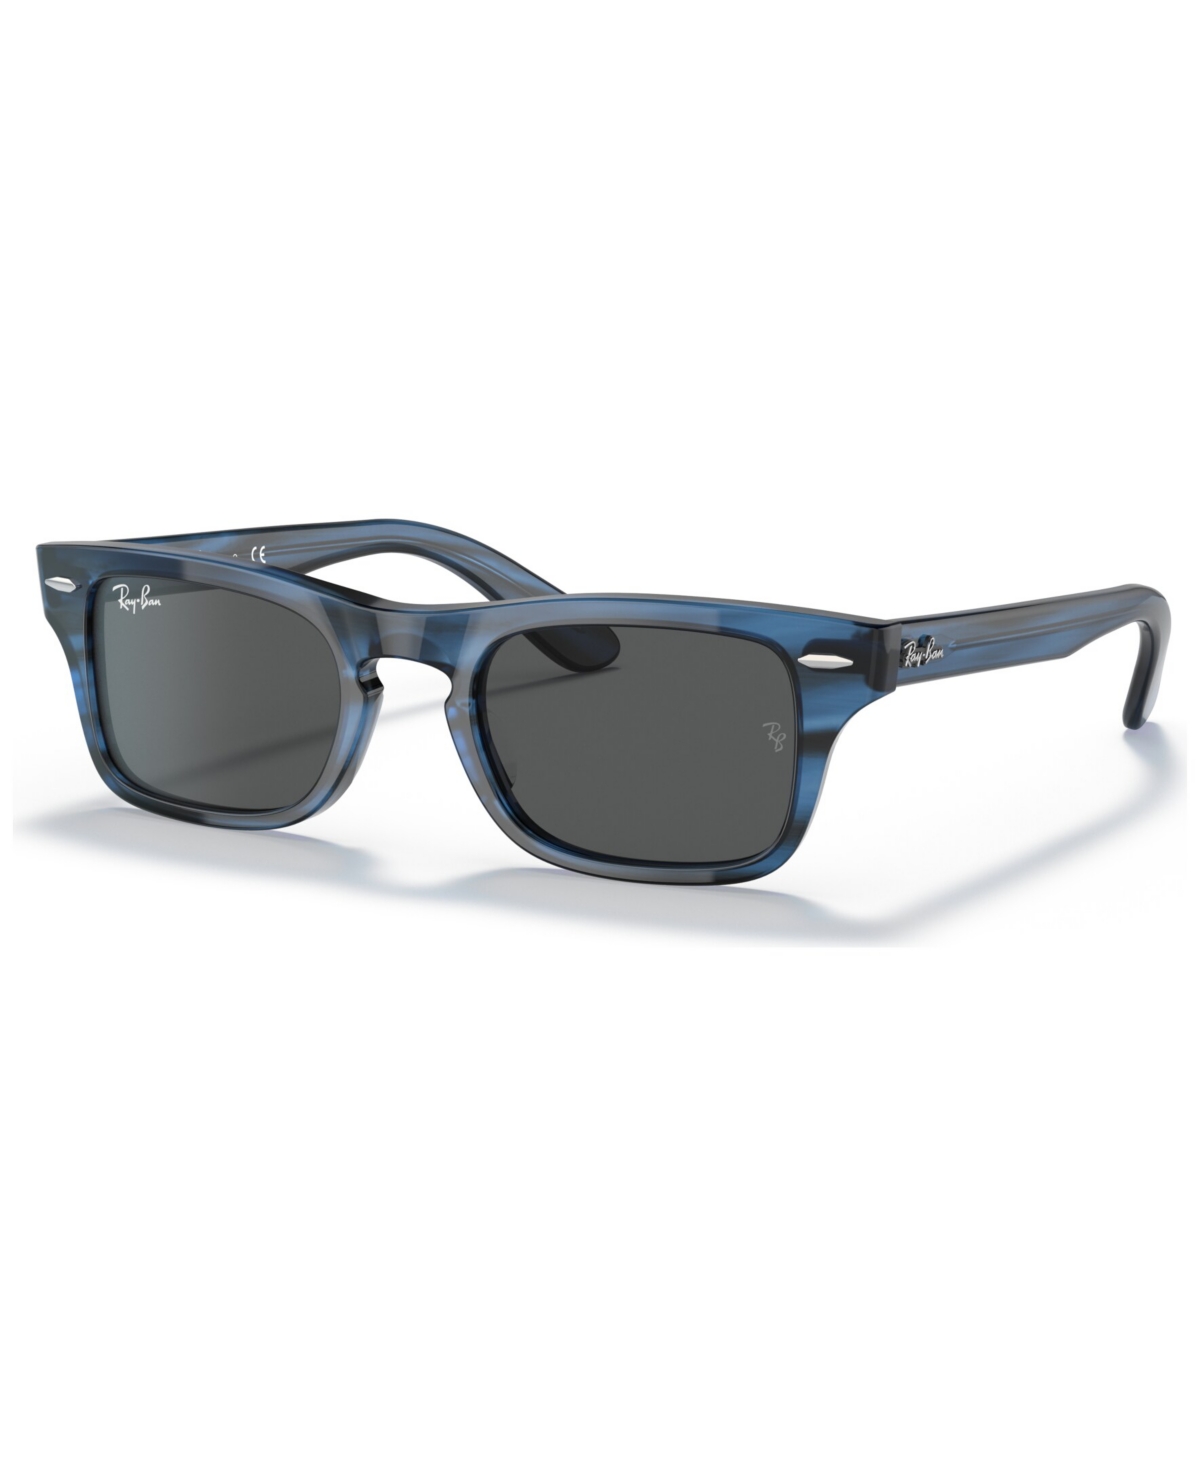 Ray-ban Jr Kids Sunglasses, Rj9083s (ages 11-13) In Polished Striped Blue